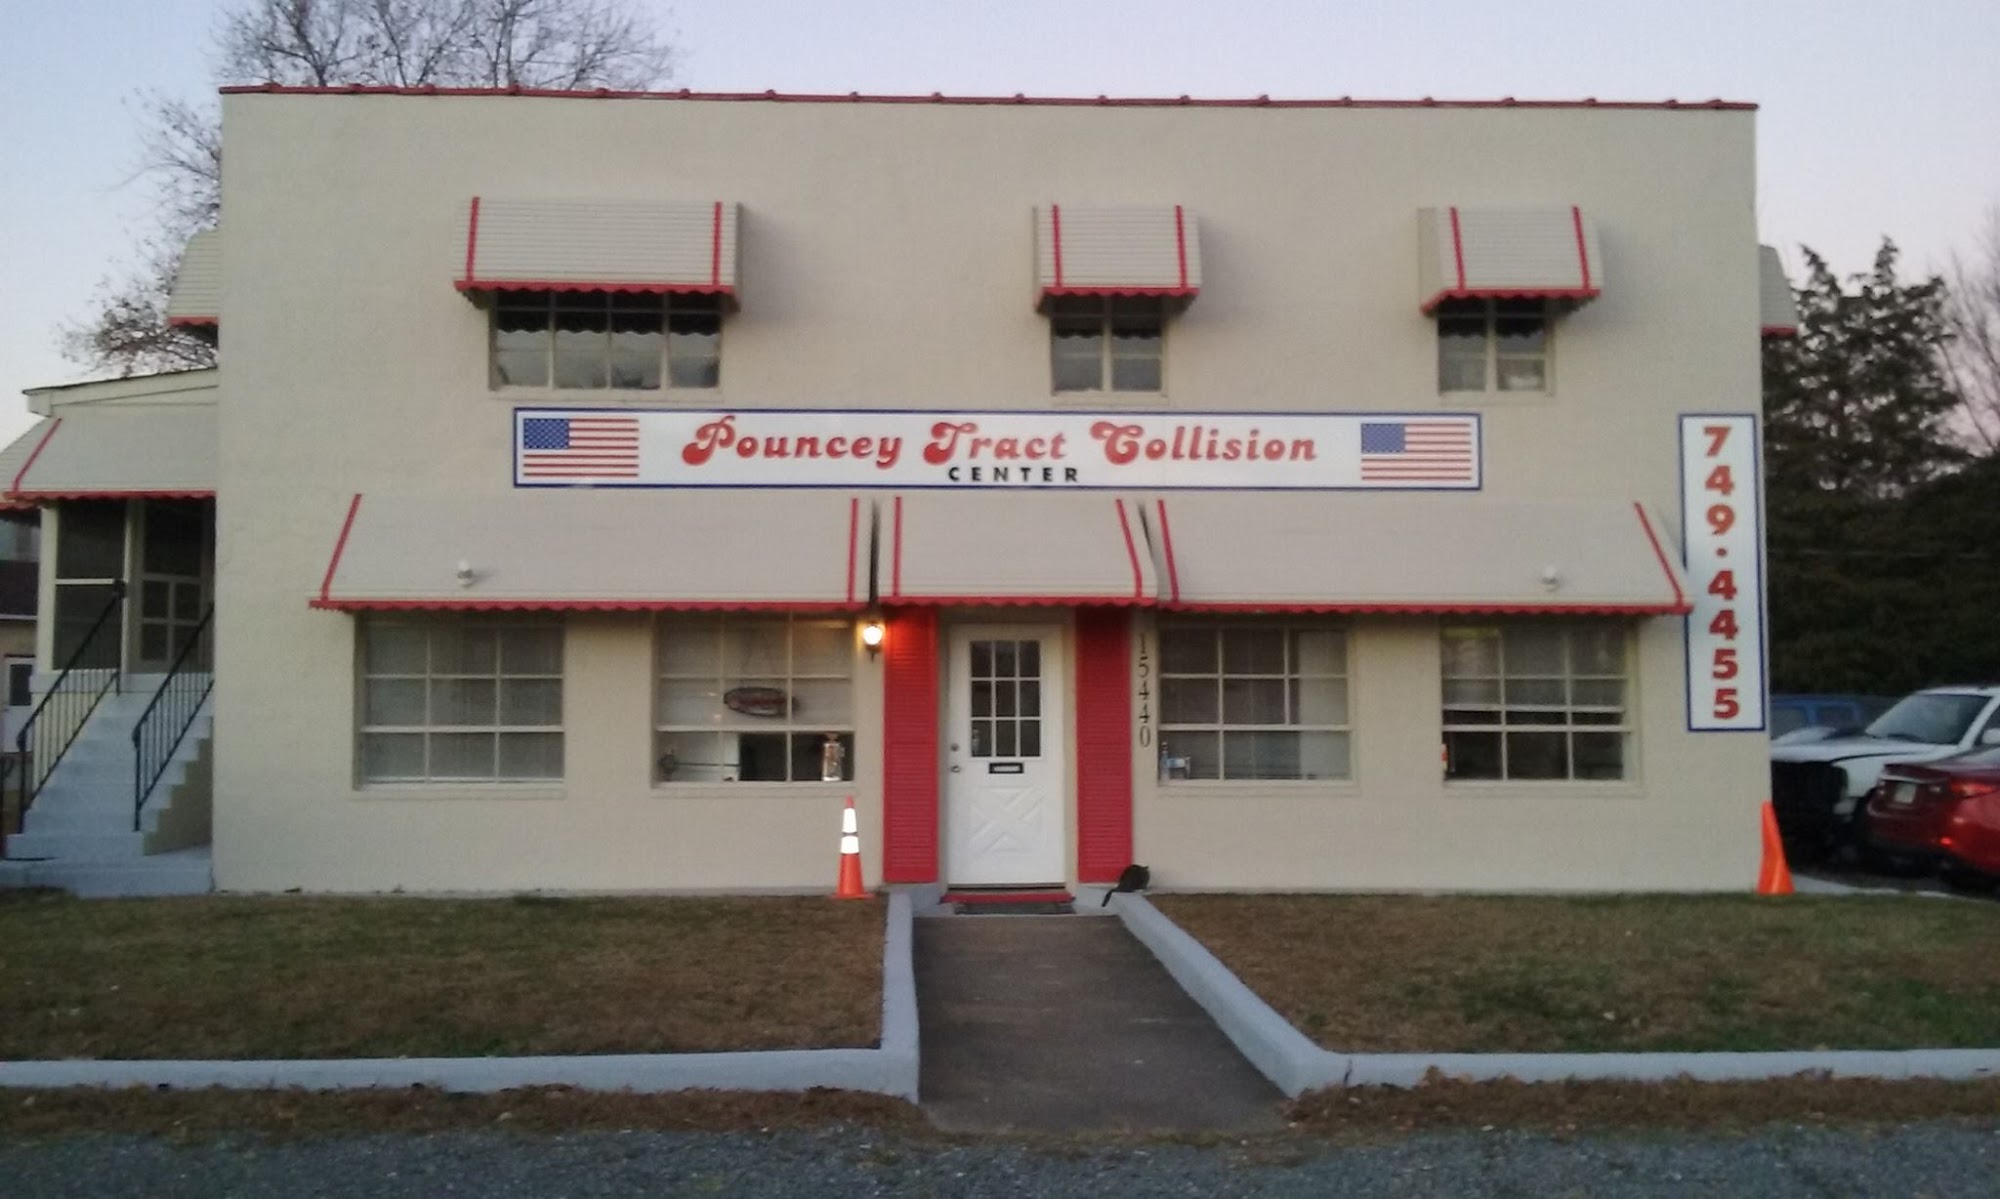 POUNCEY TRACT COLLISION CENTER